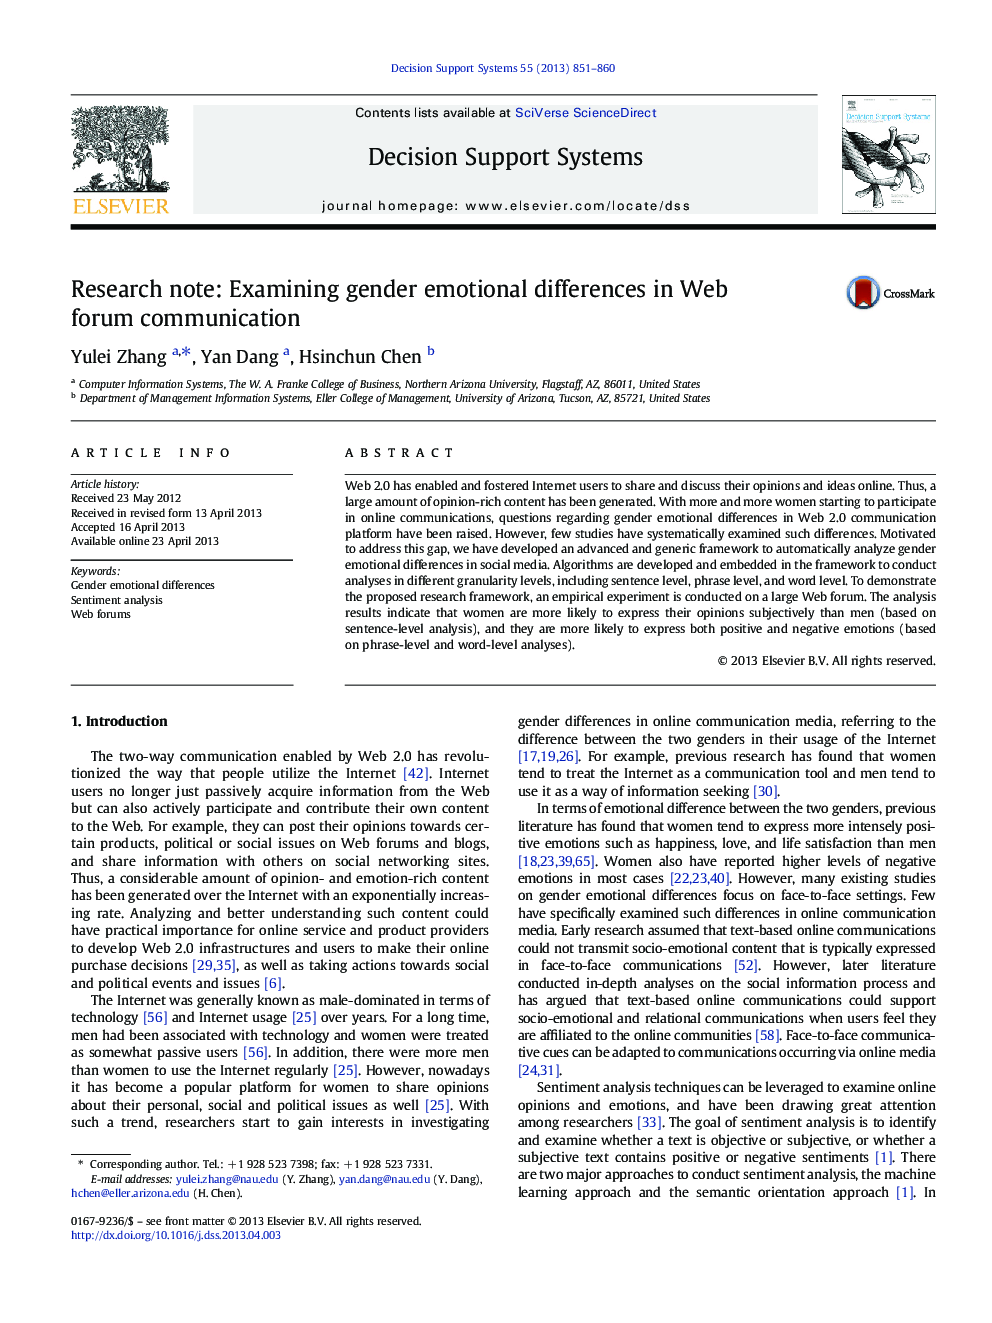 Research note: Examining gender emotional differences in Web forum communication